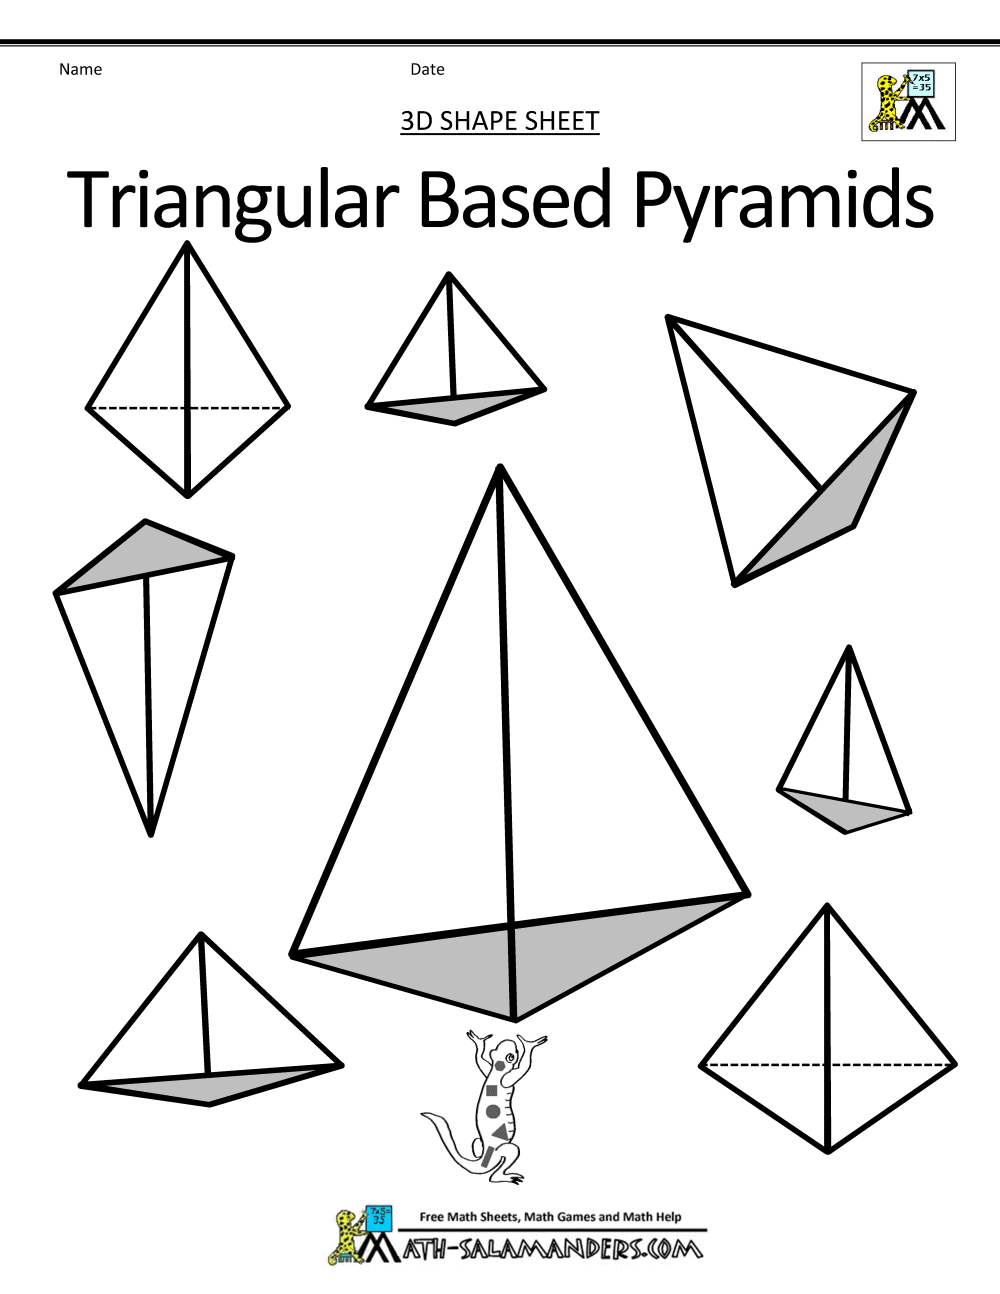 Pyramid worksheets printable shapes. Addition clipart shape